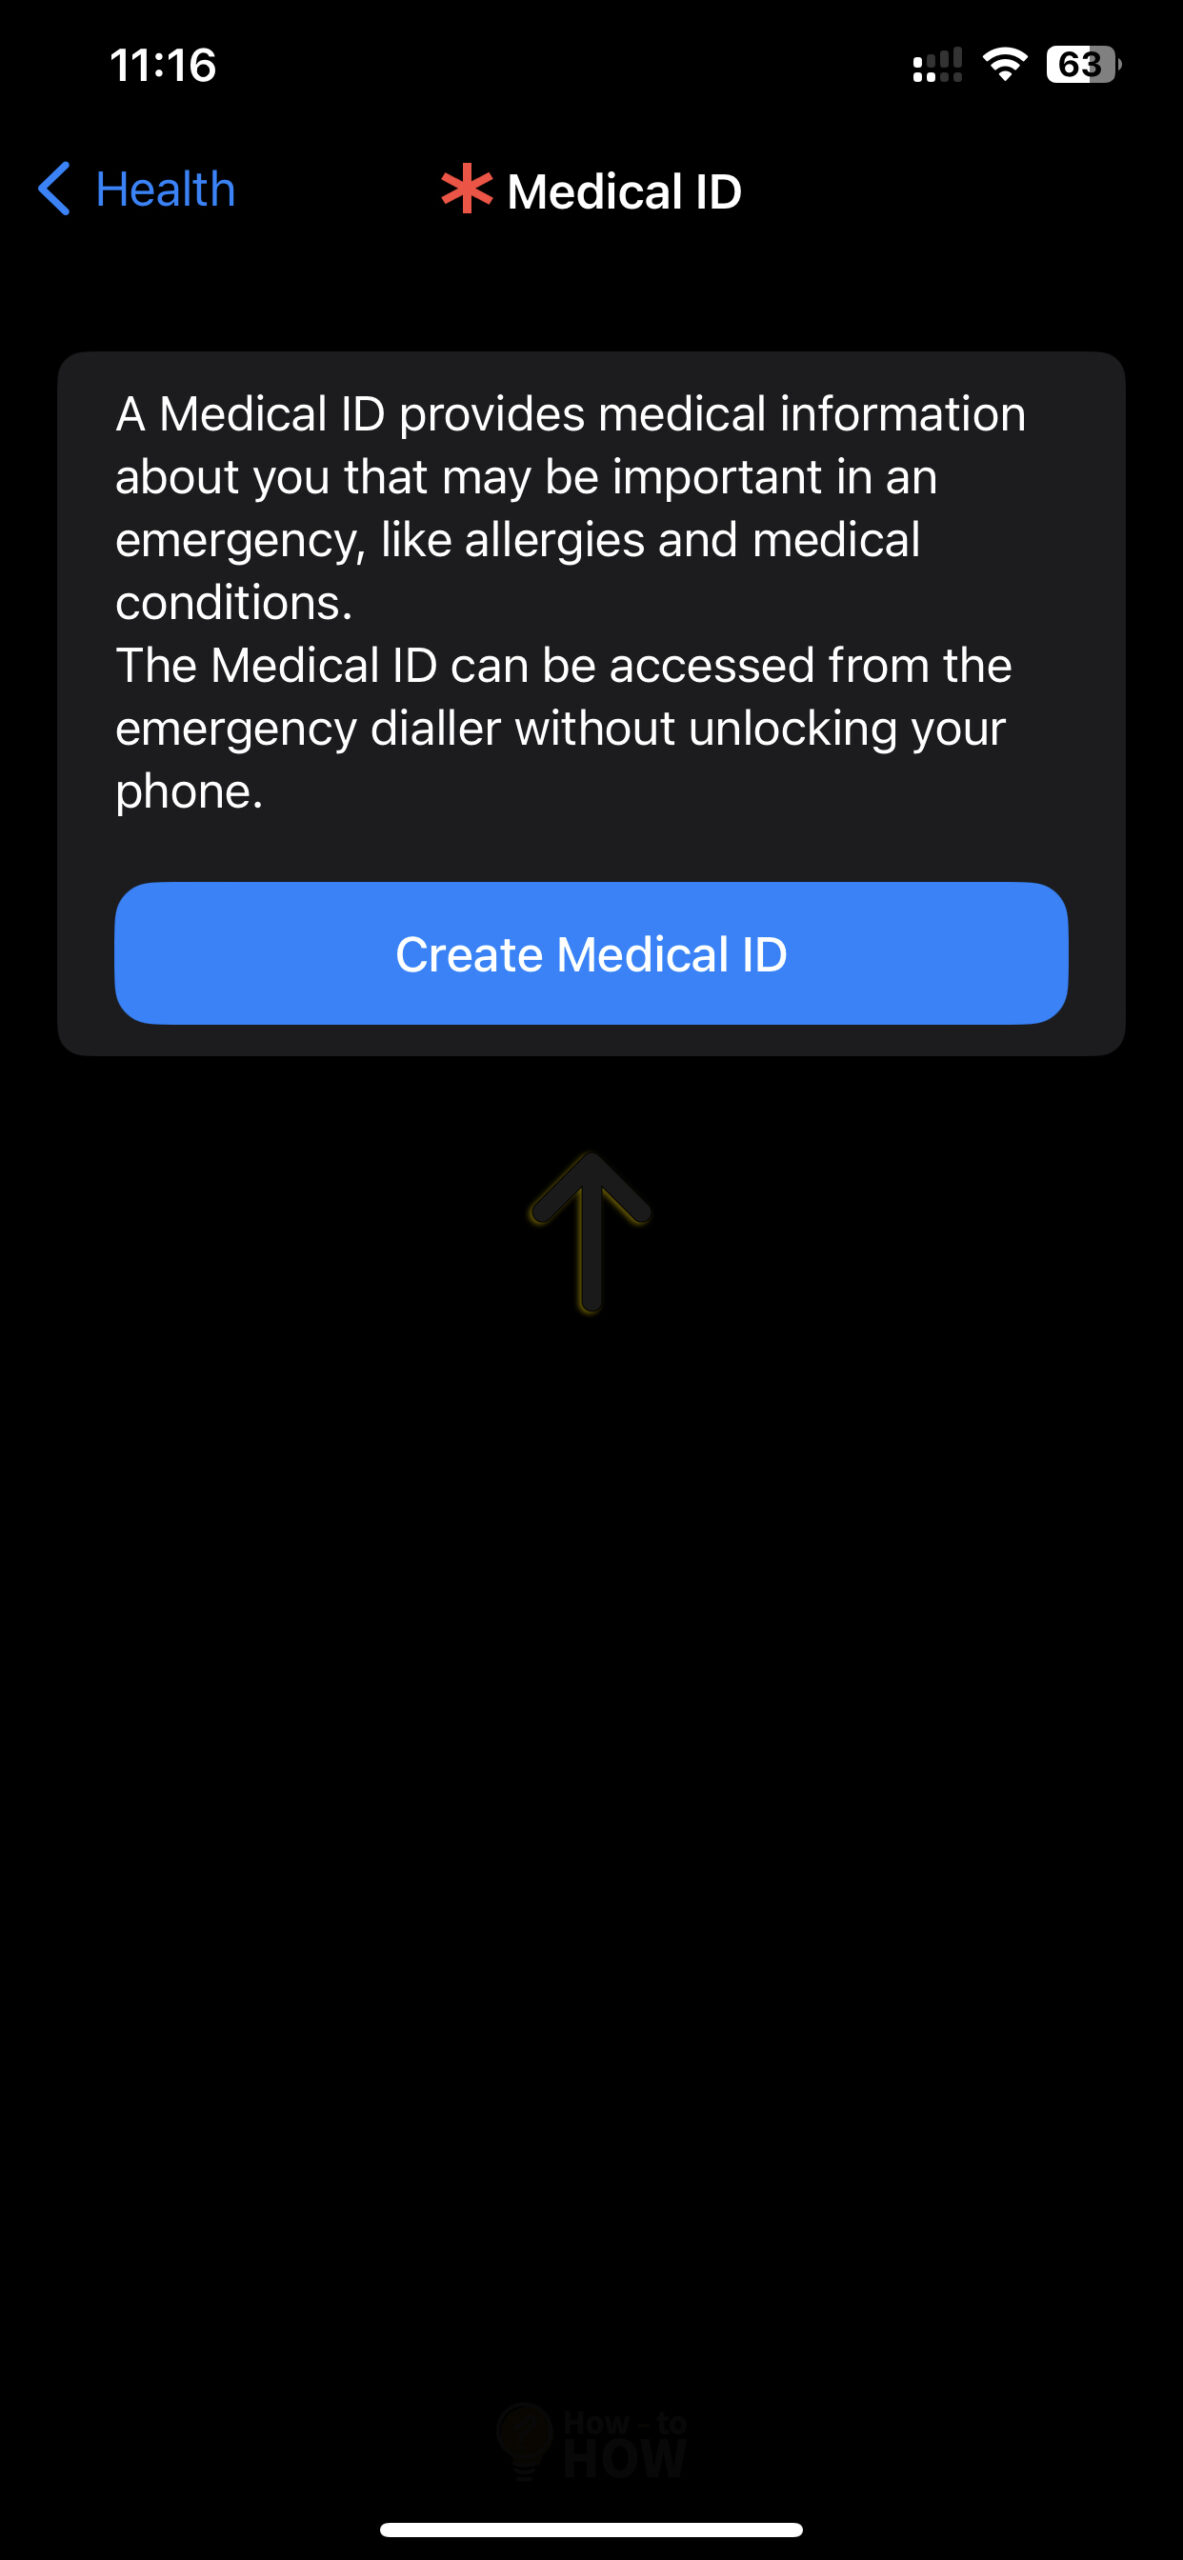 Create your Medical ID